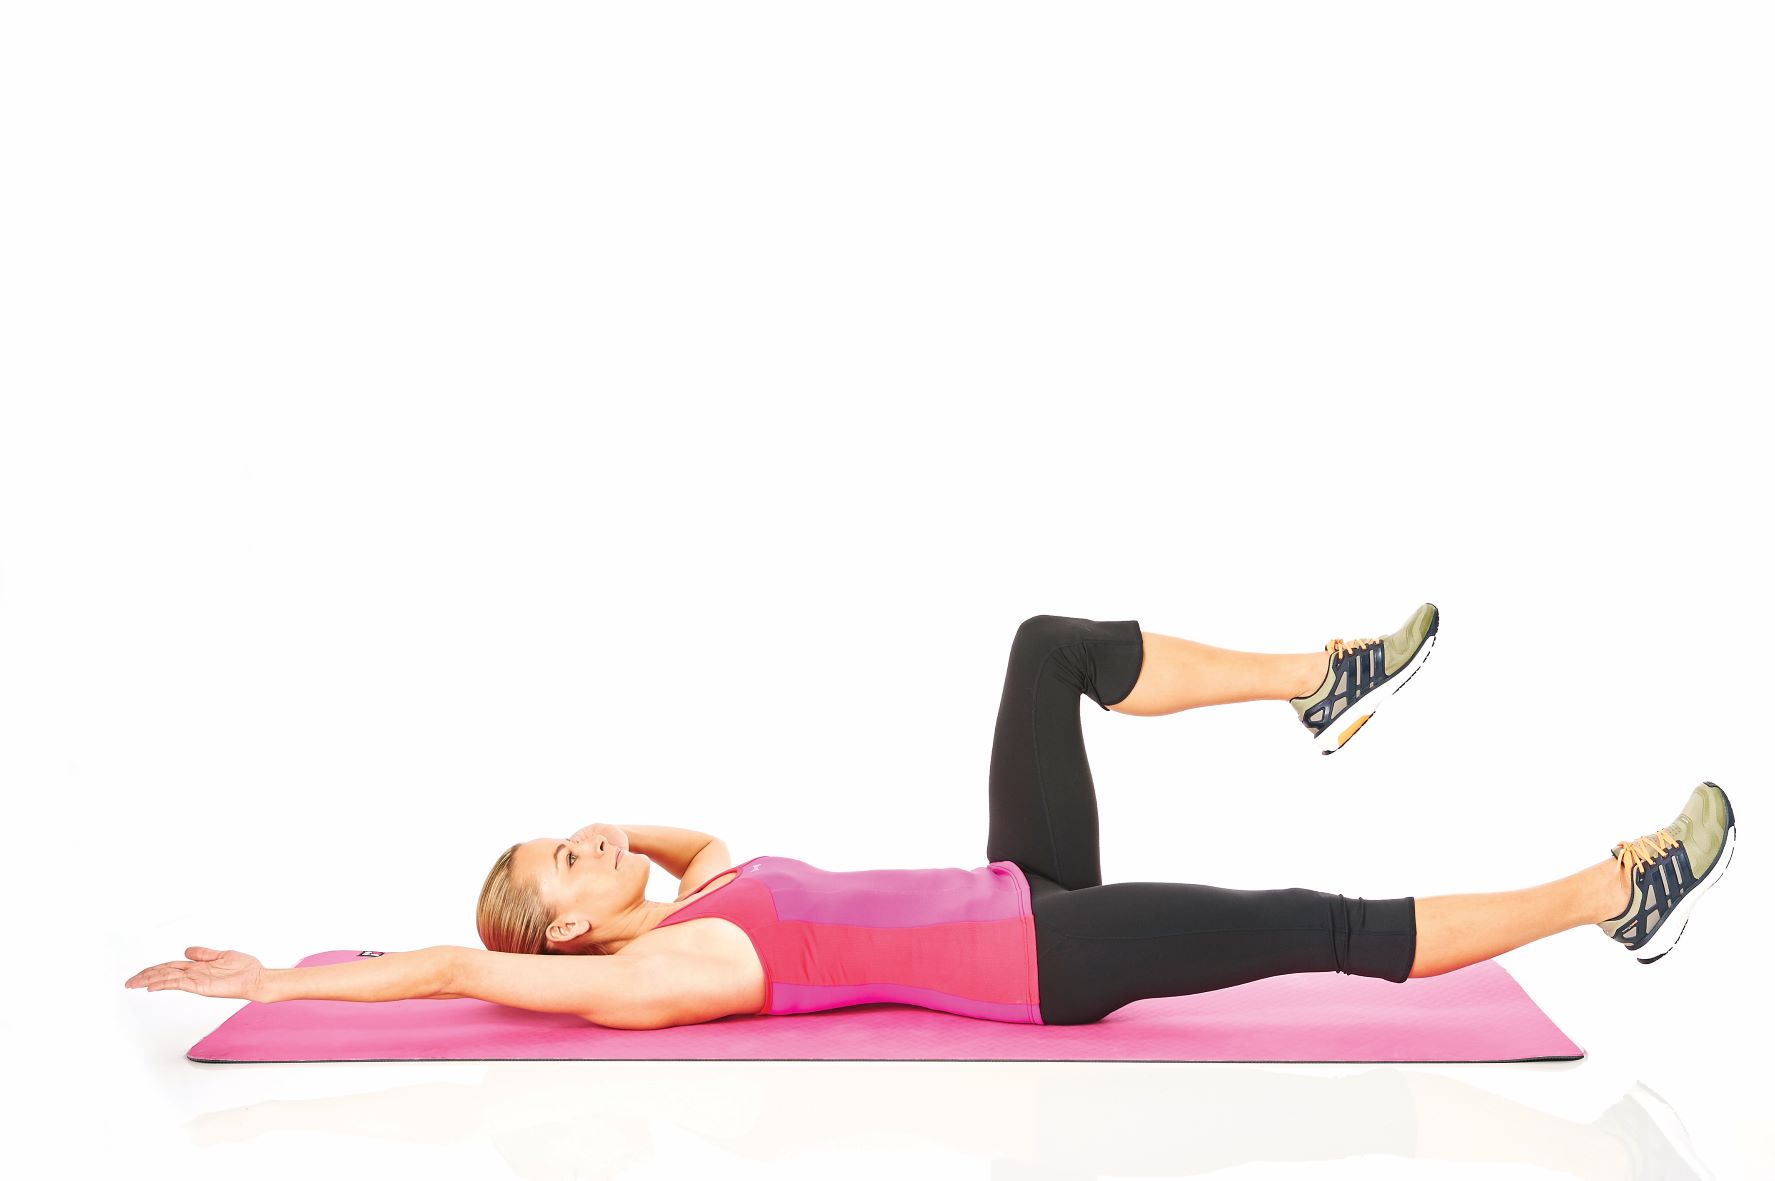 straight arm and leg crunches best exercises exercise to lose belly fat